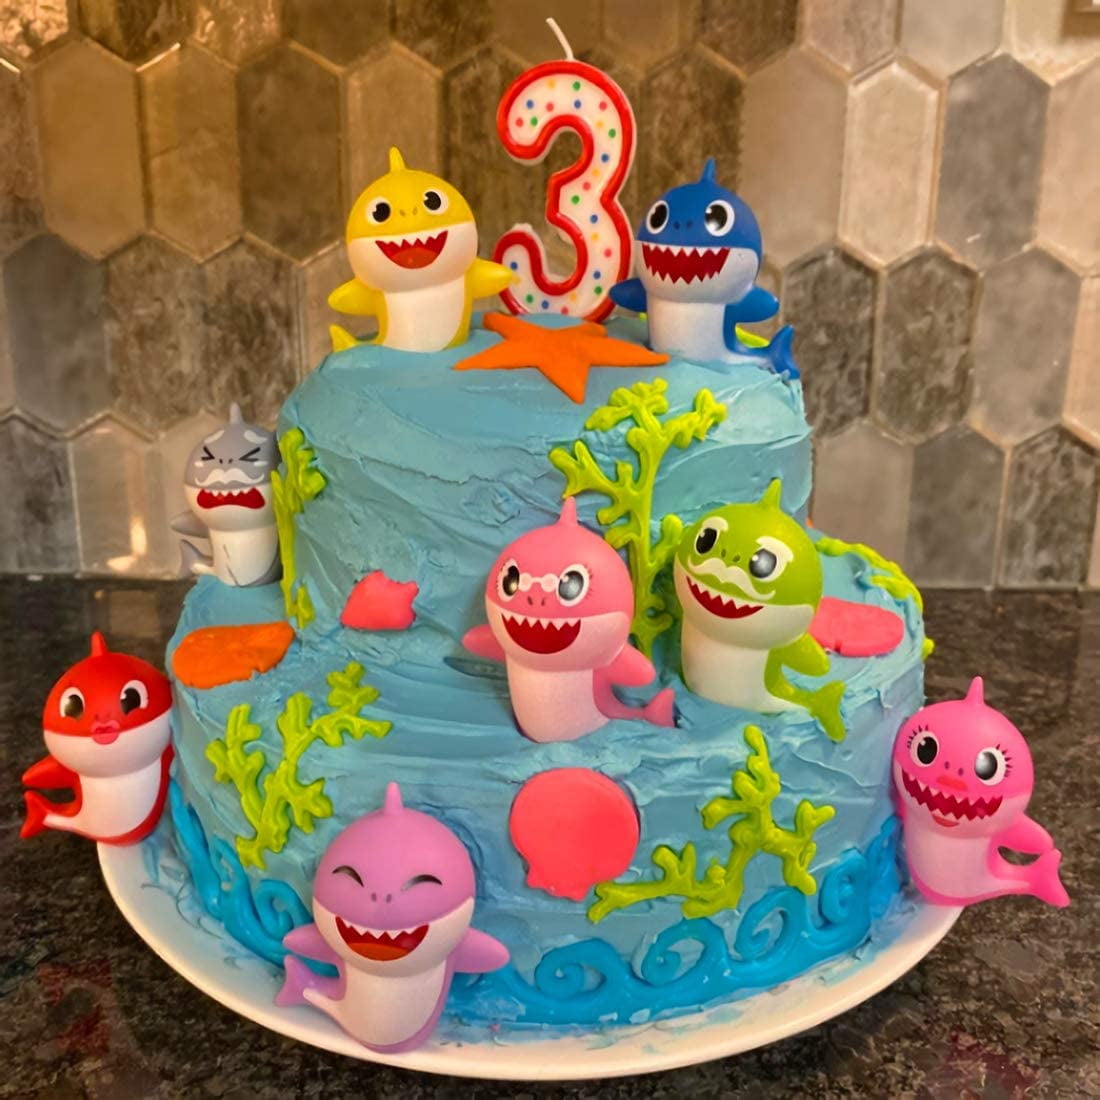 Halal-Certified Two-Tier Baby Shark Cake (For Princess) - Piece Of Cake